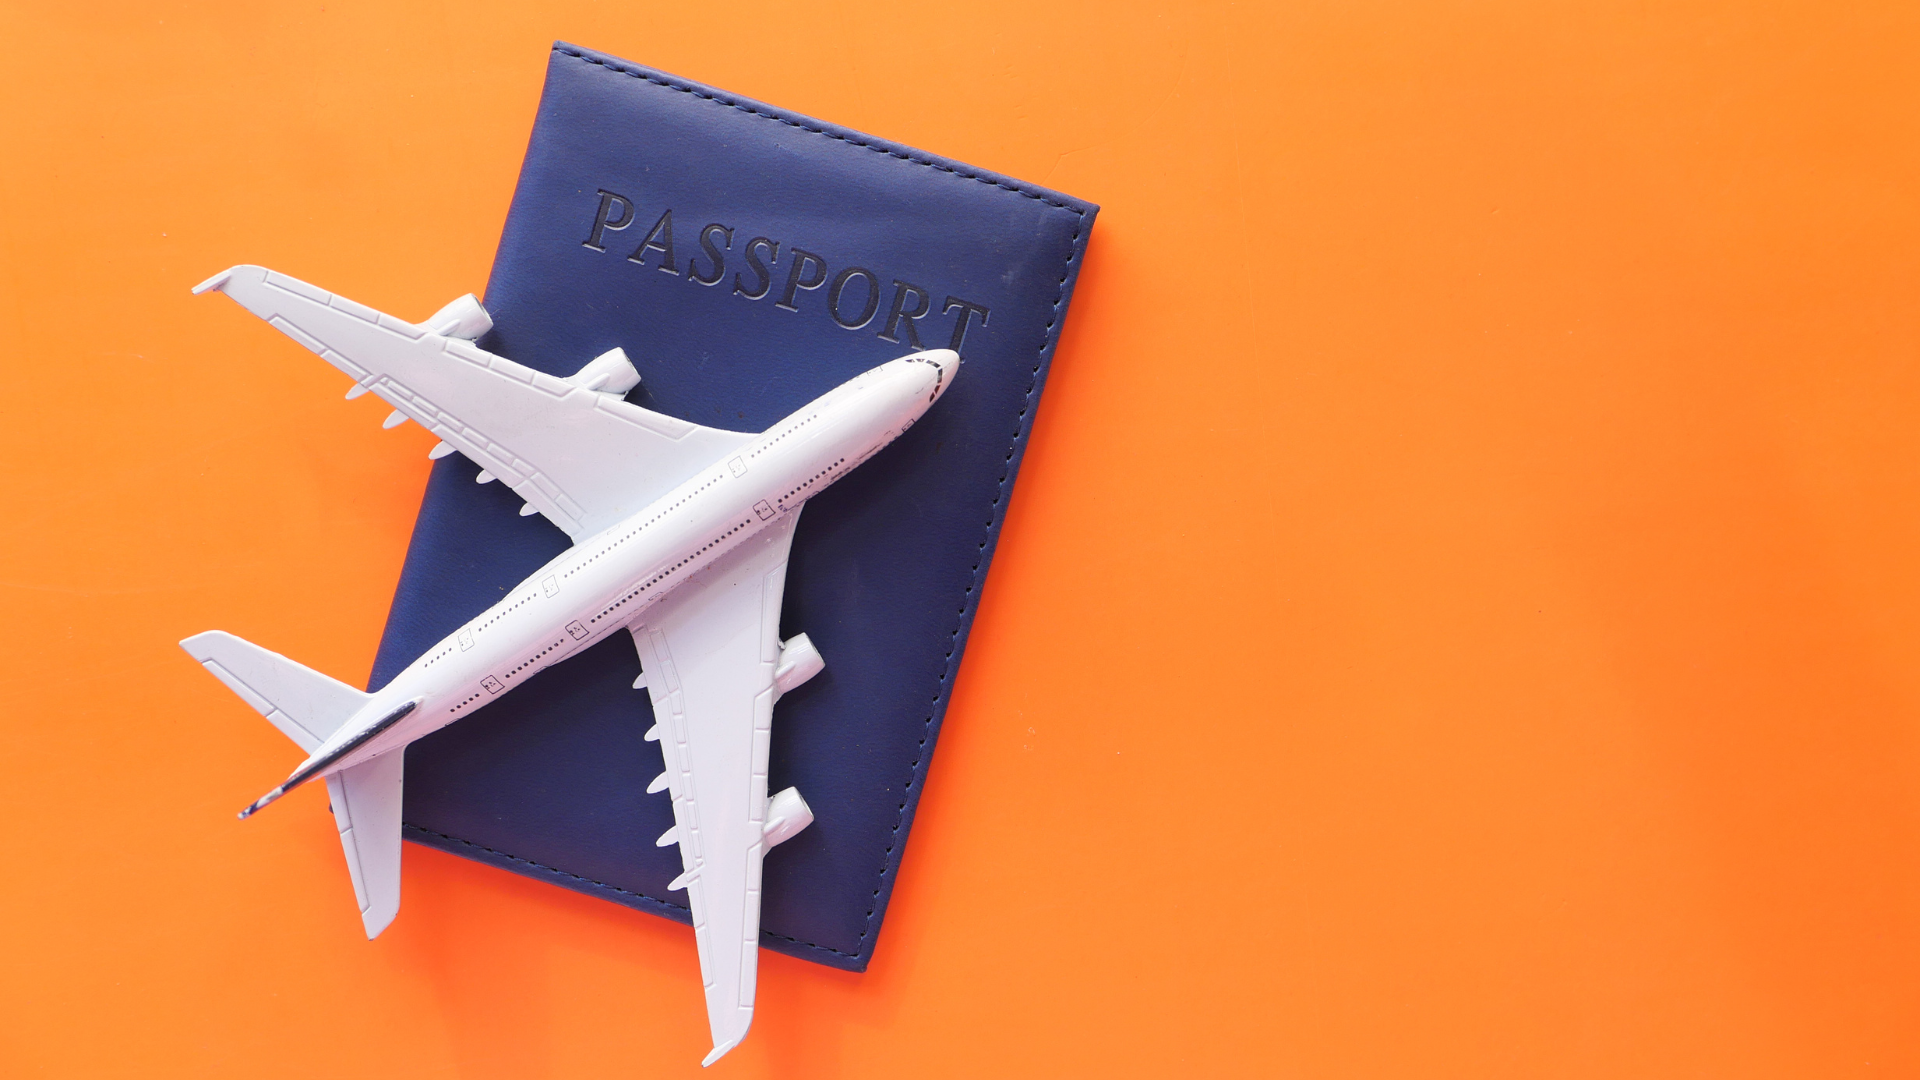 model airplane on top of a passport